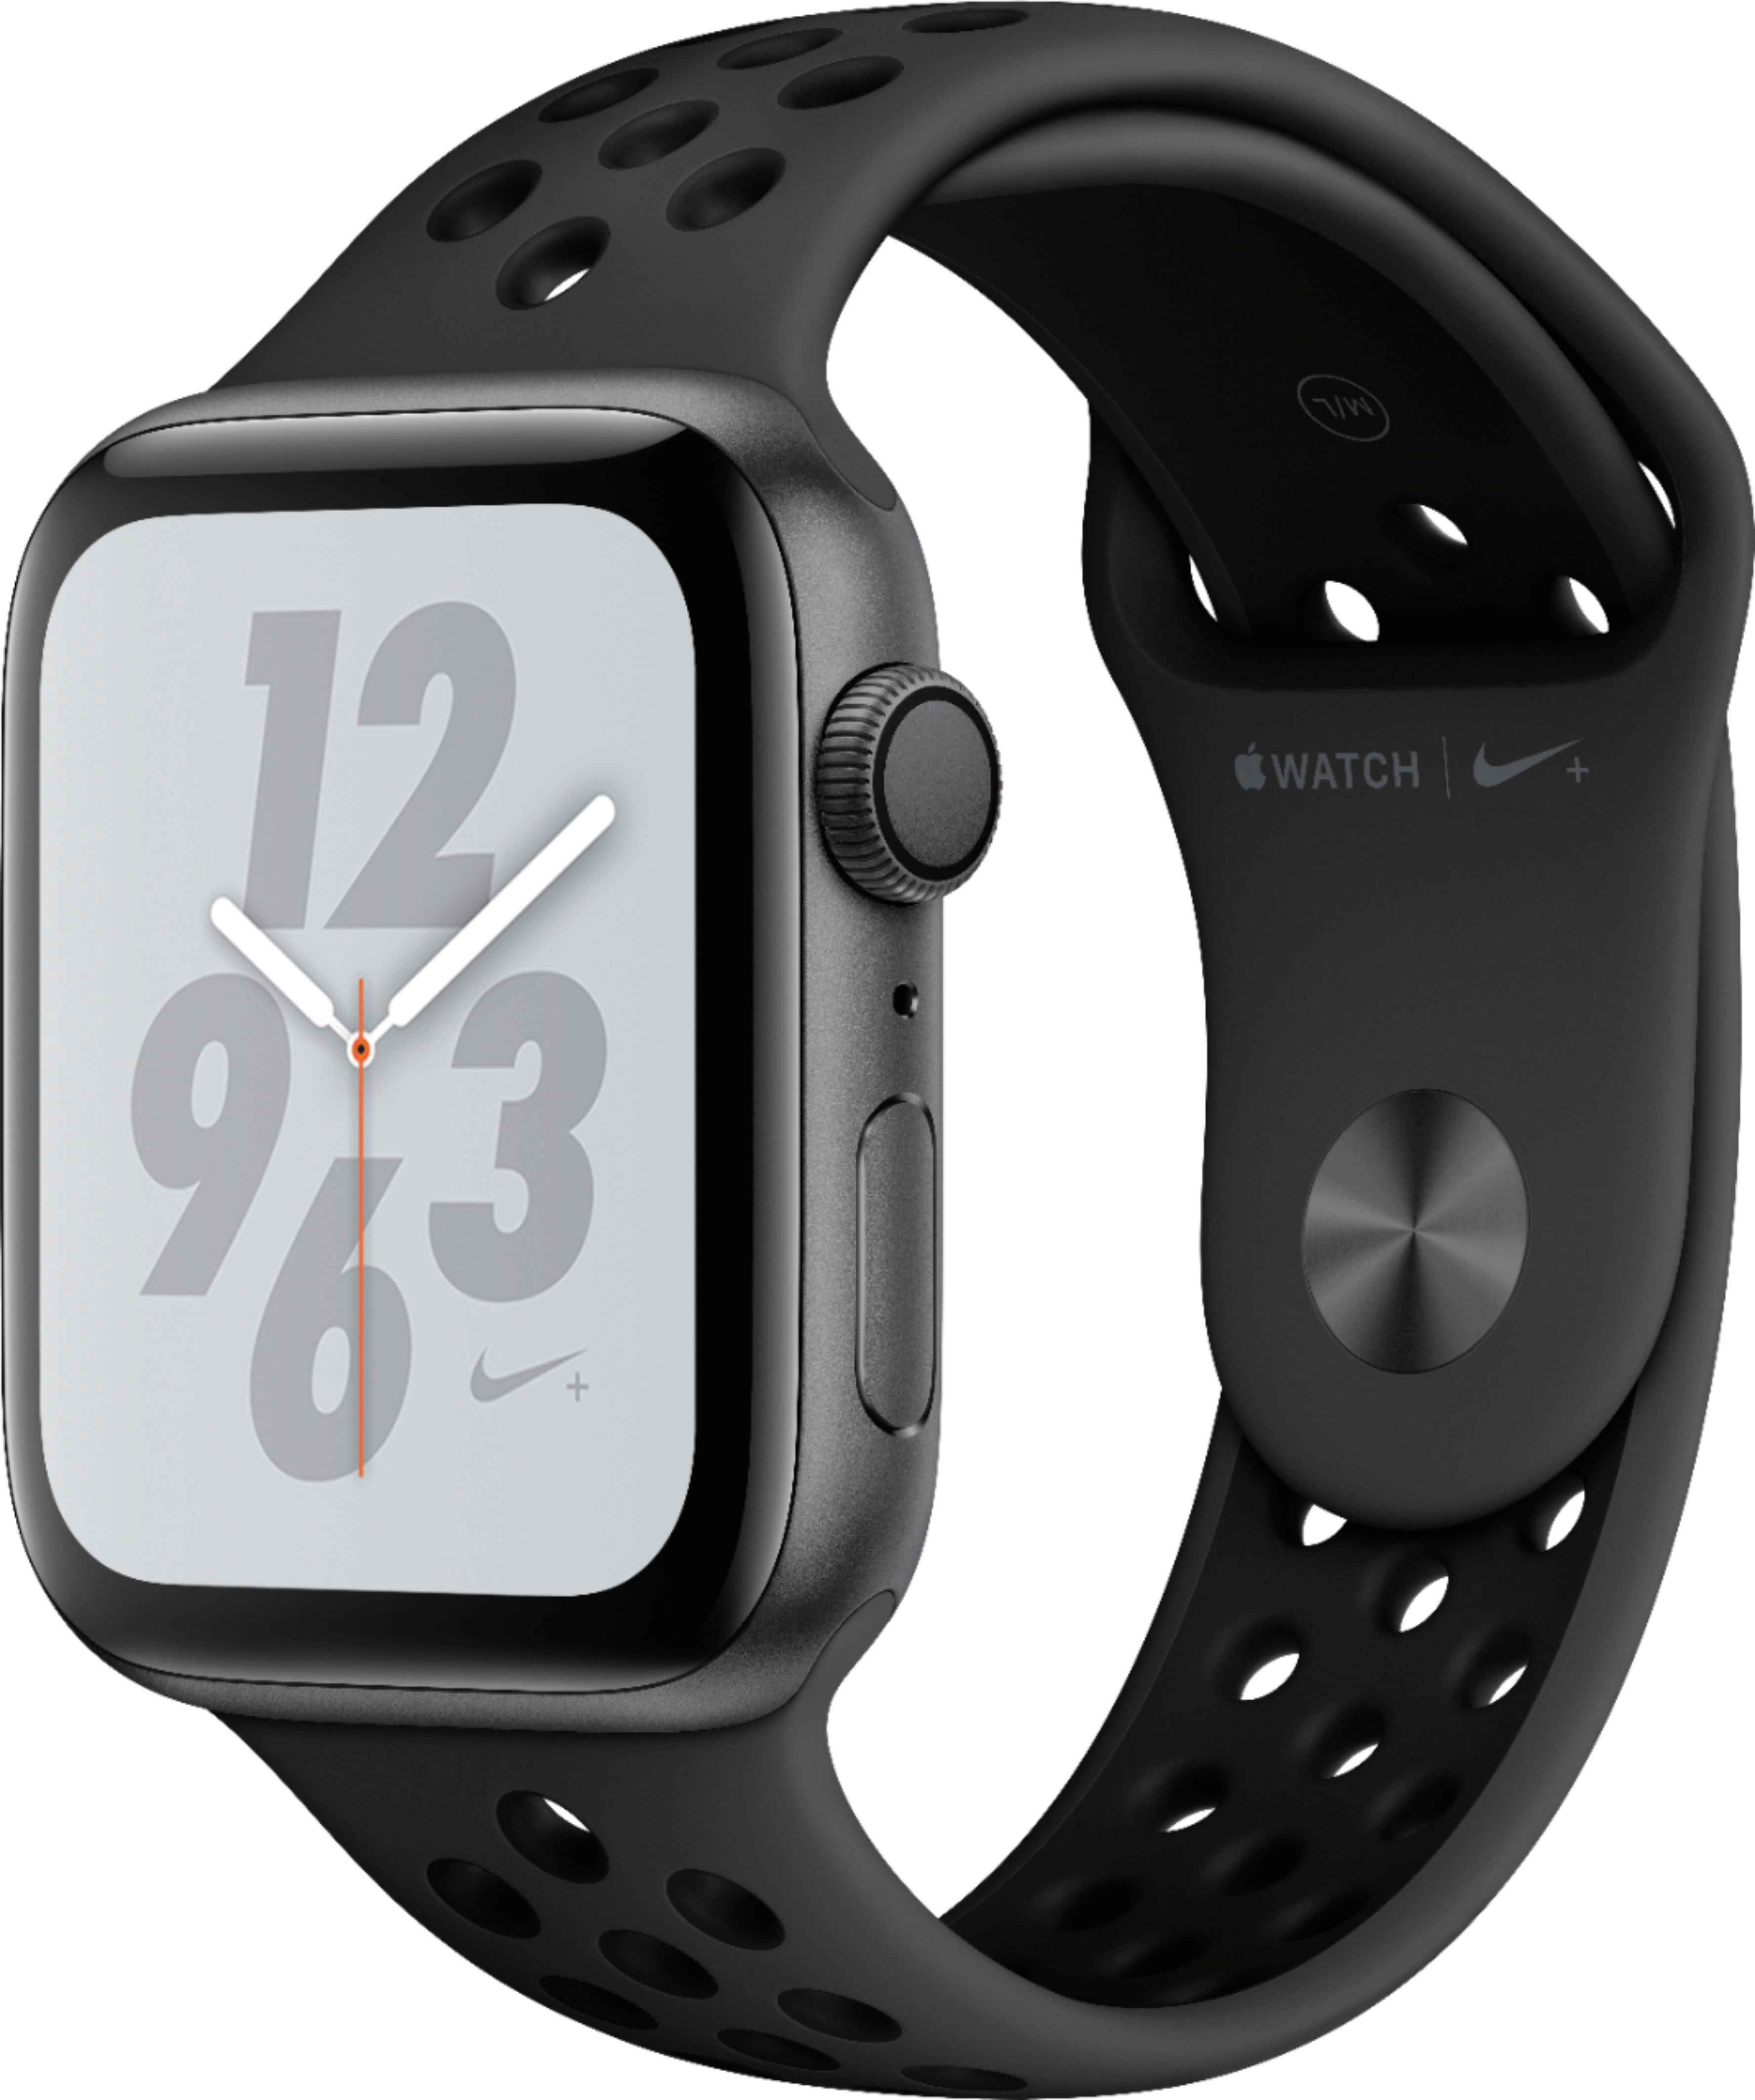 Apple - Apple Watch Nike+ Series 4 (GPS) 44mm Space Gray Aluminum Case with Anthracite/Black Nike Sport Band - Space Gray Aluminum